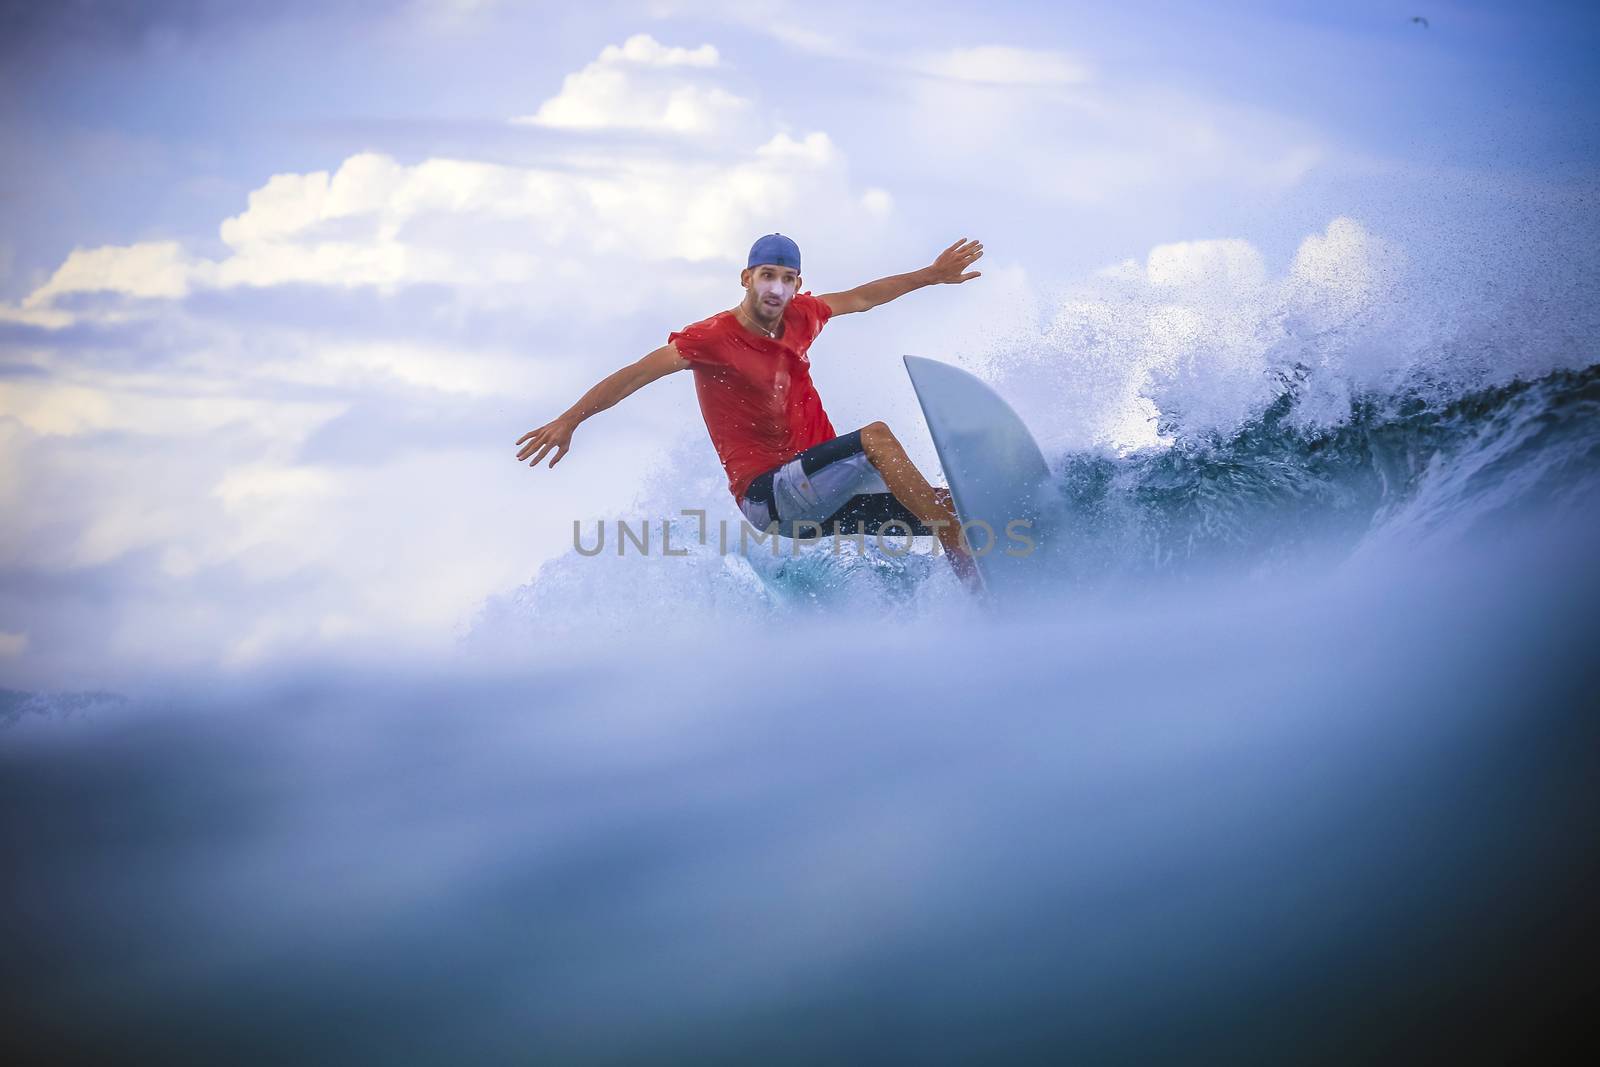 Surfer on Amazing Blue Wave by truphoto